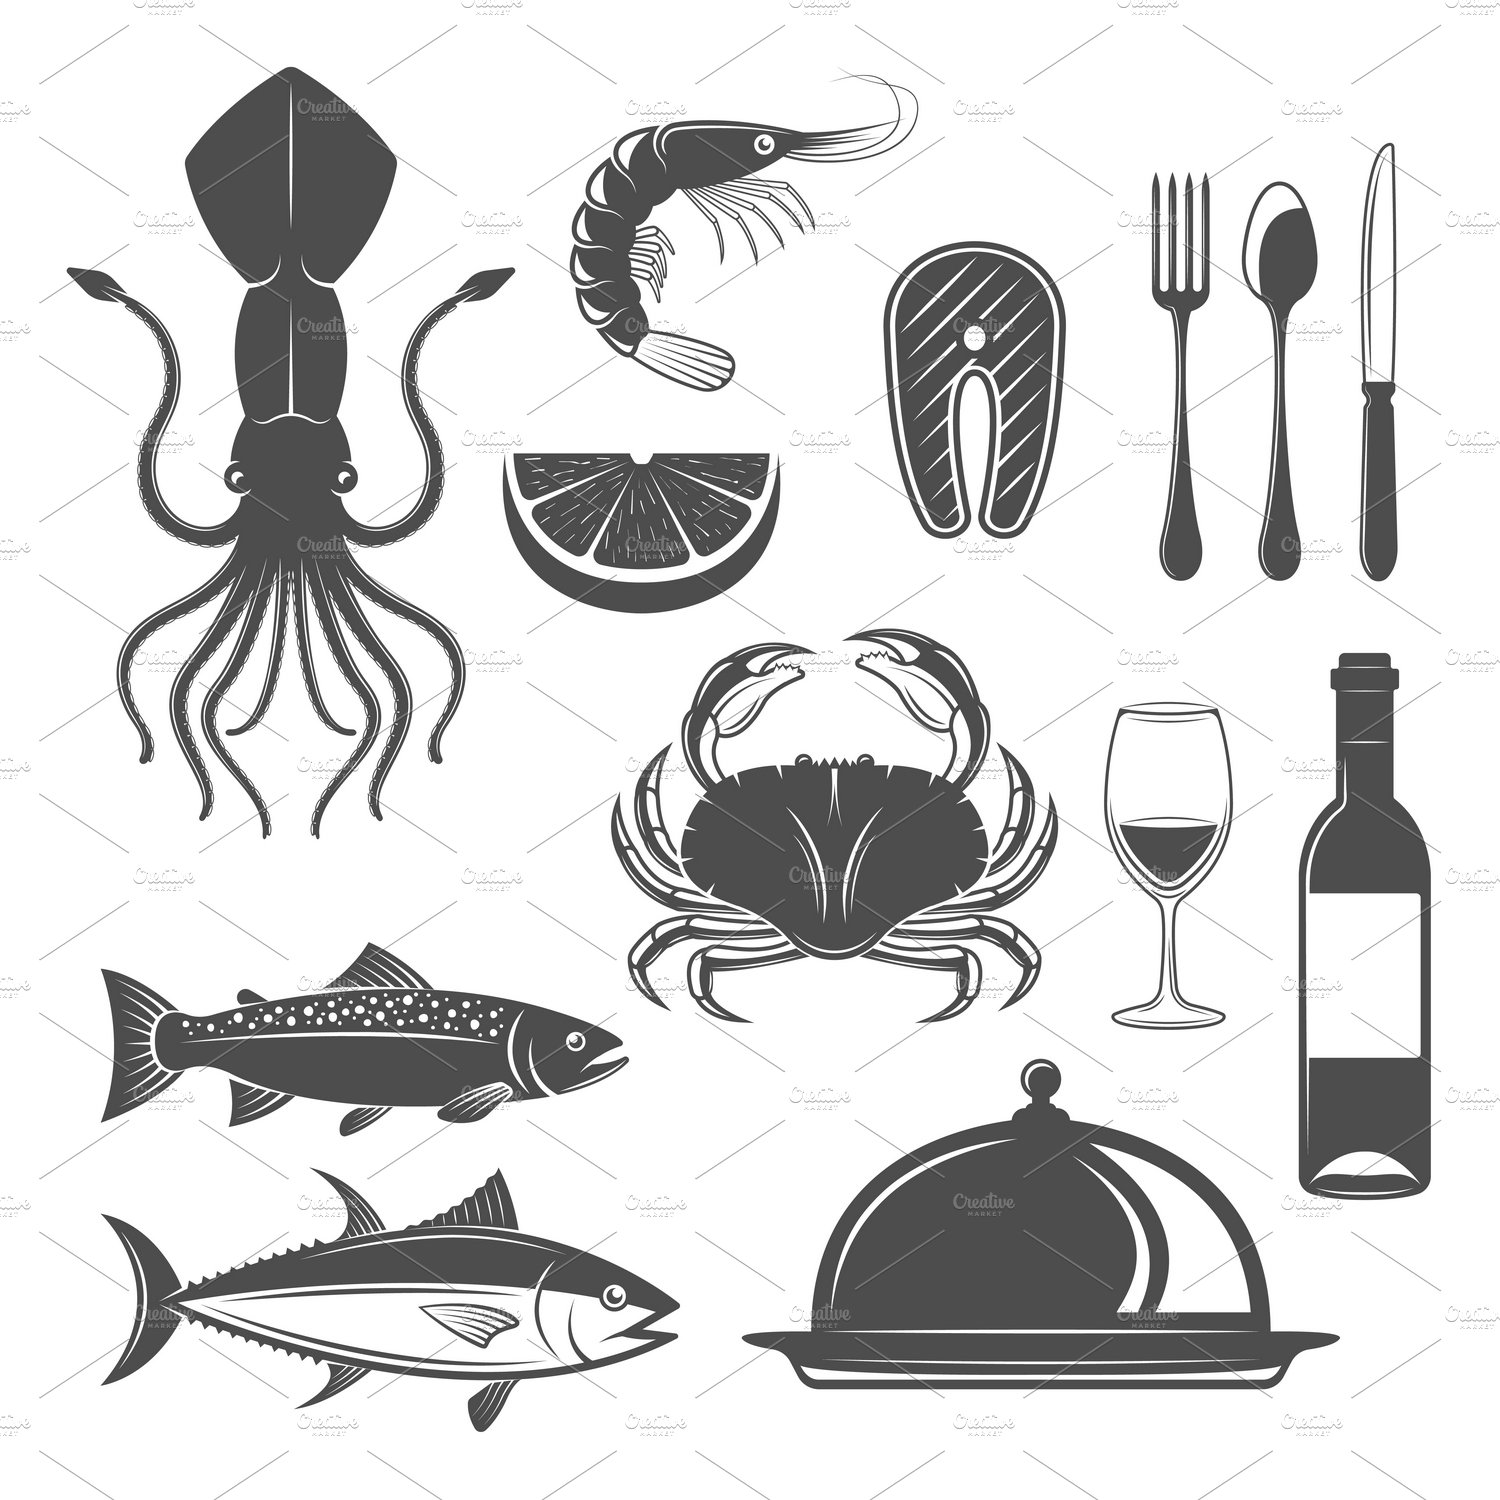 Seafood Monochrome Objects Set cover image.